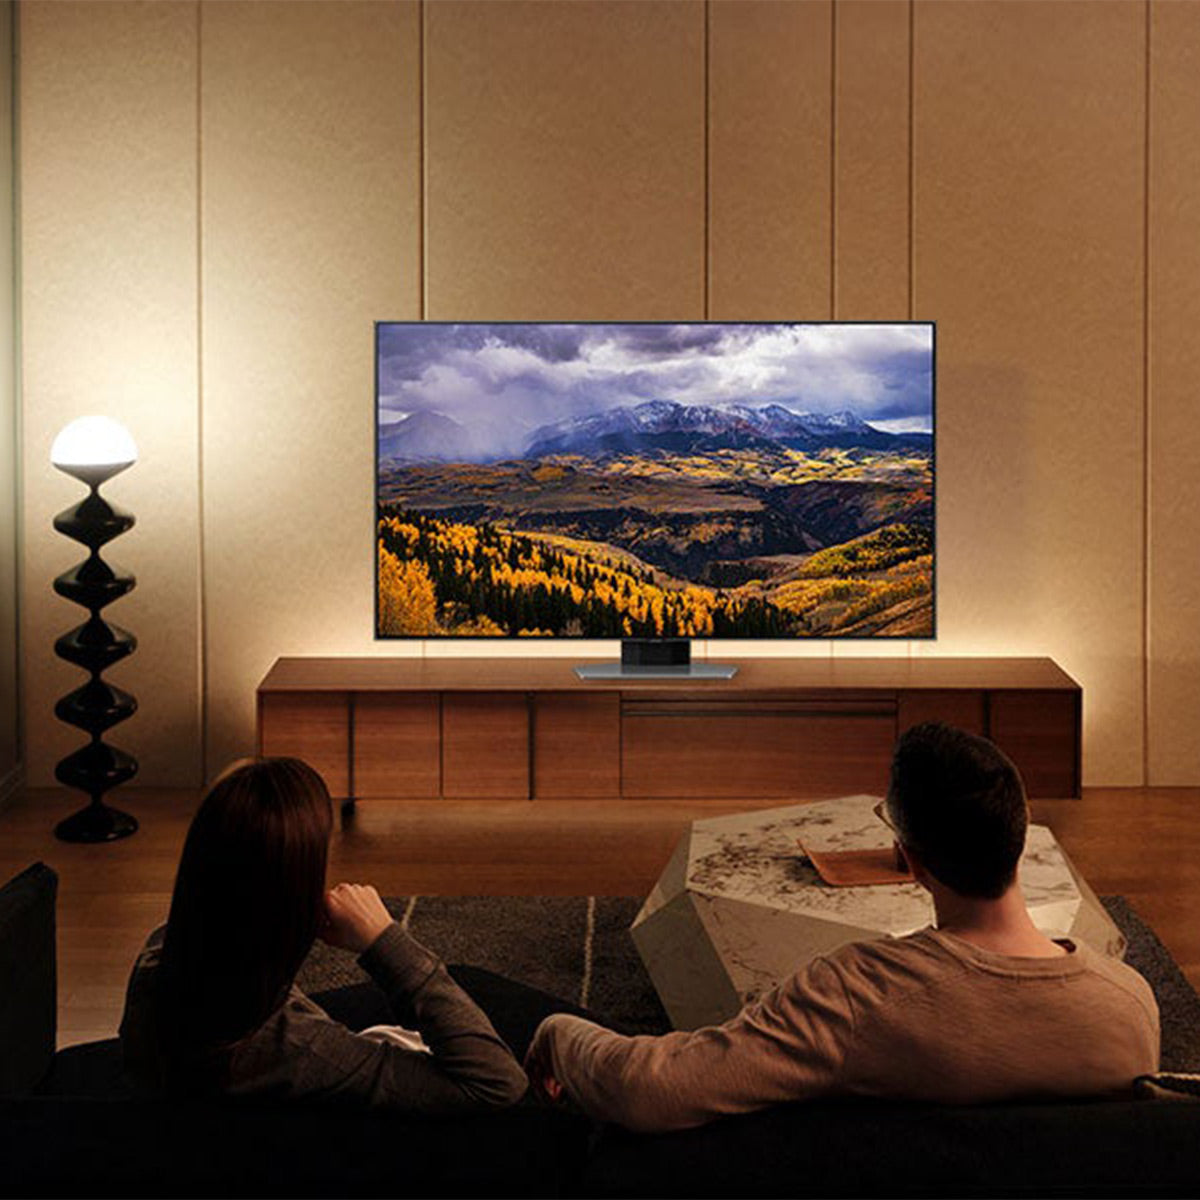 Samsung QN75Q80CA 75" QLED 4K Smart TV with Quantum HDR+, Dolby Atmos, Object Tracking Sound, & 4K Upscaling (2023)